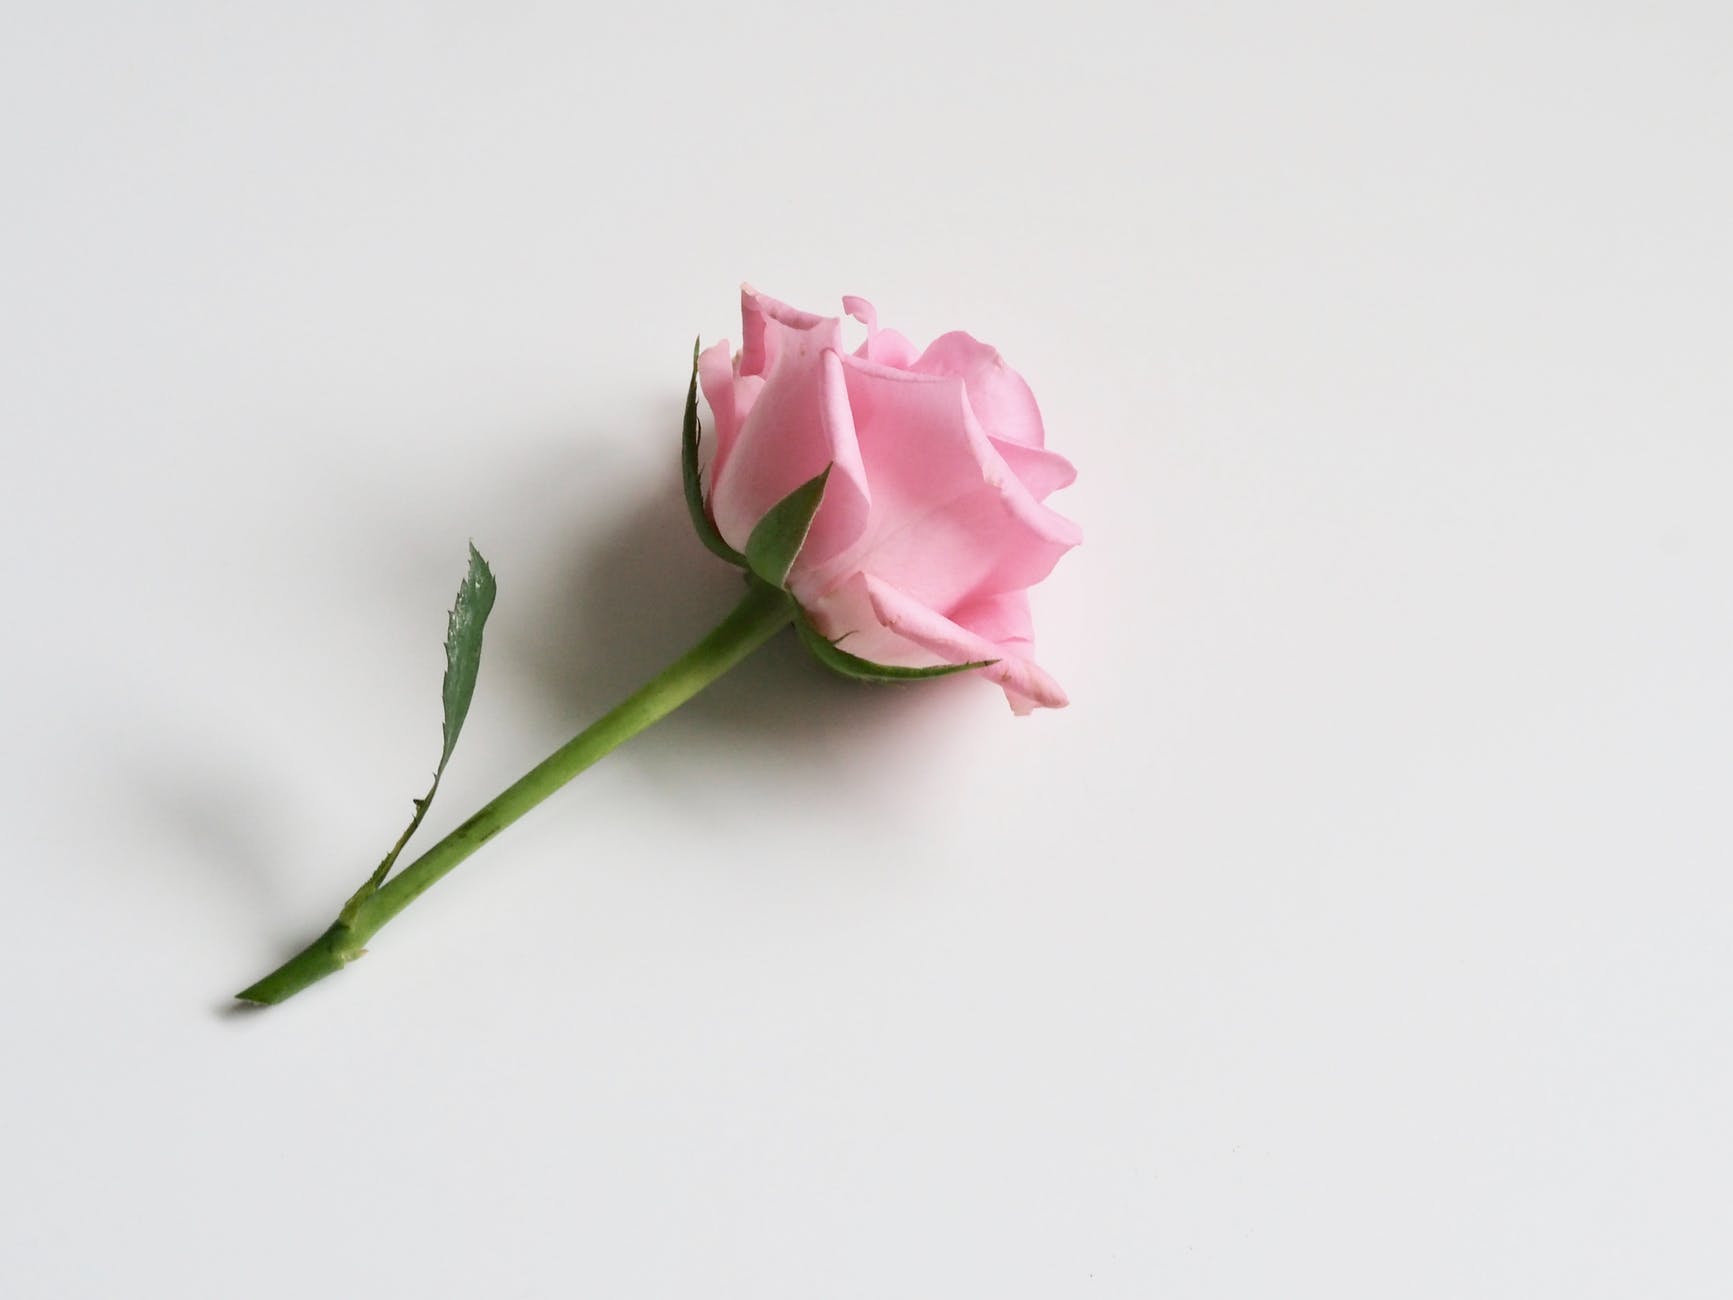 photo of pink rose on white surface